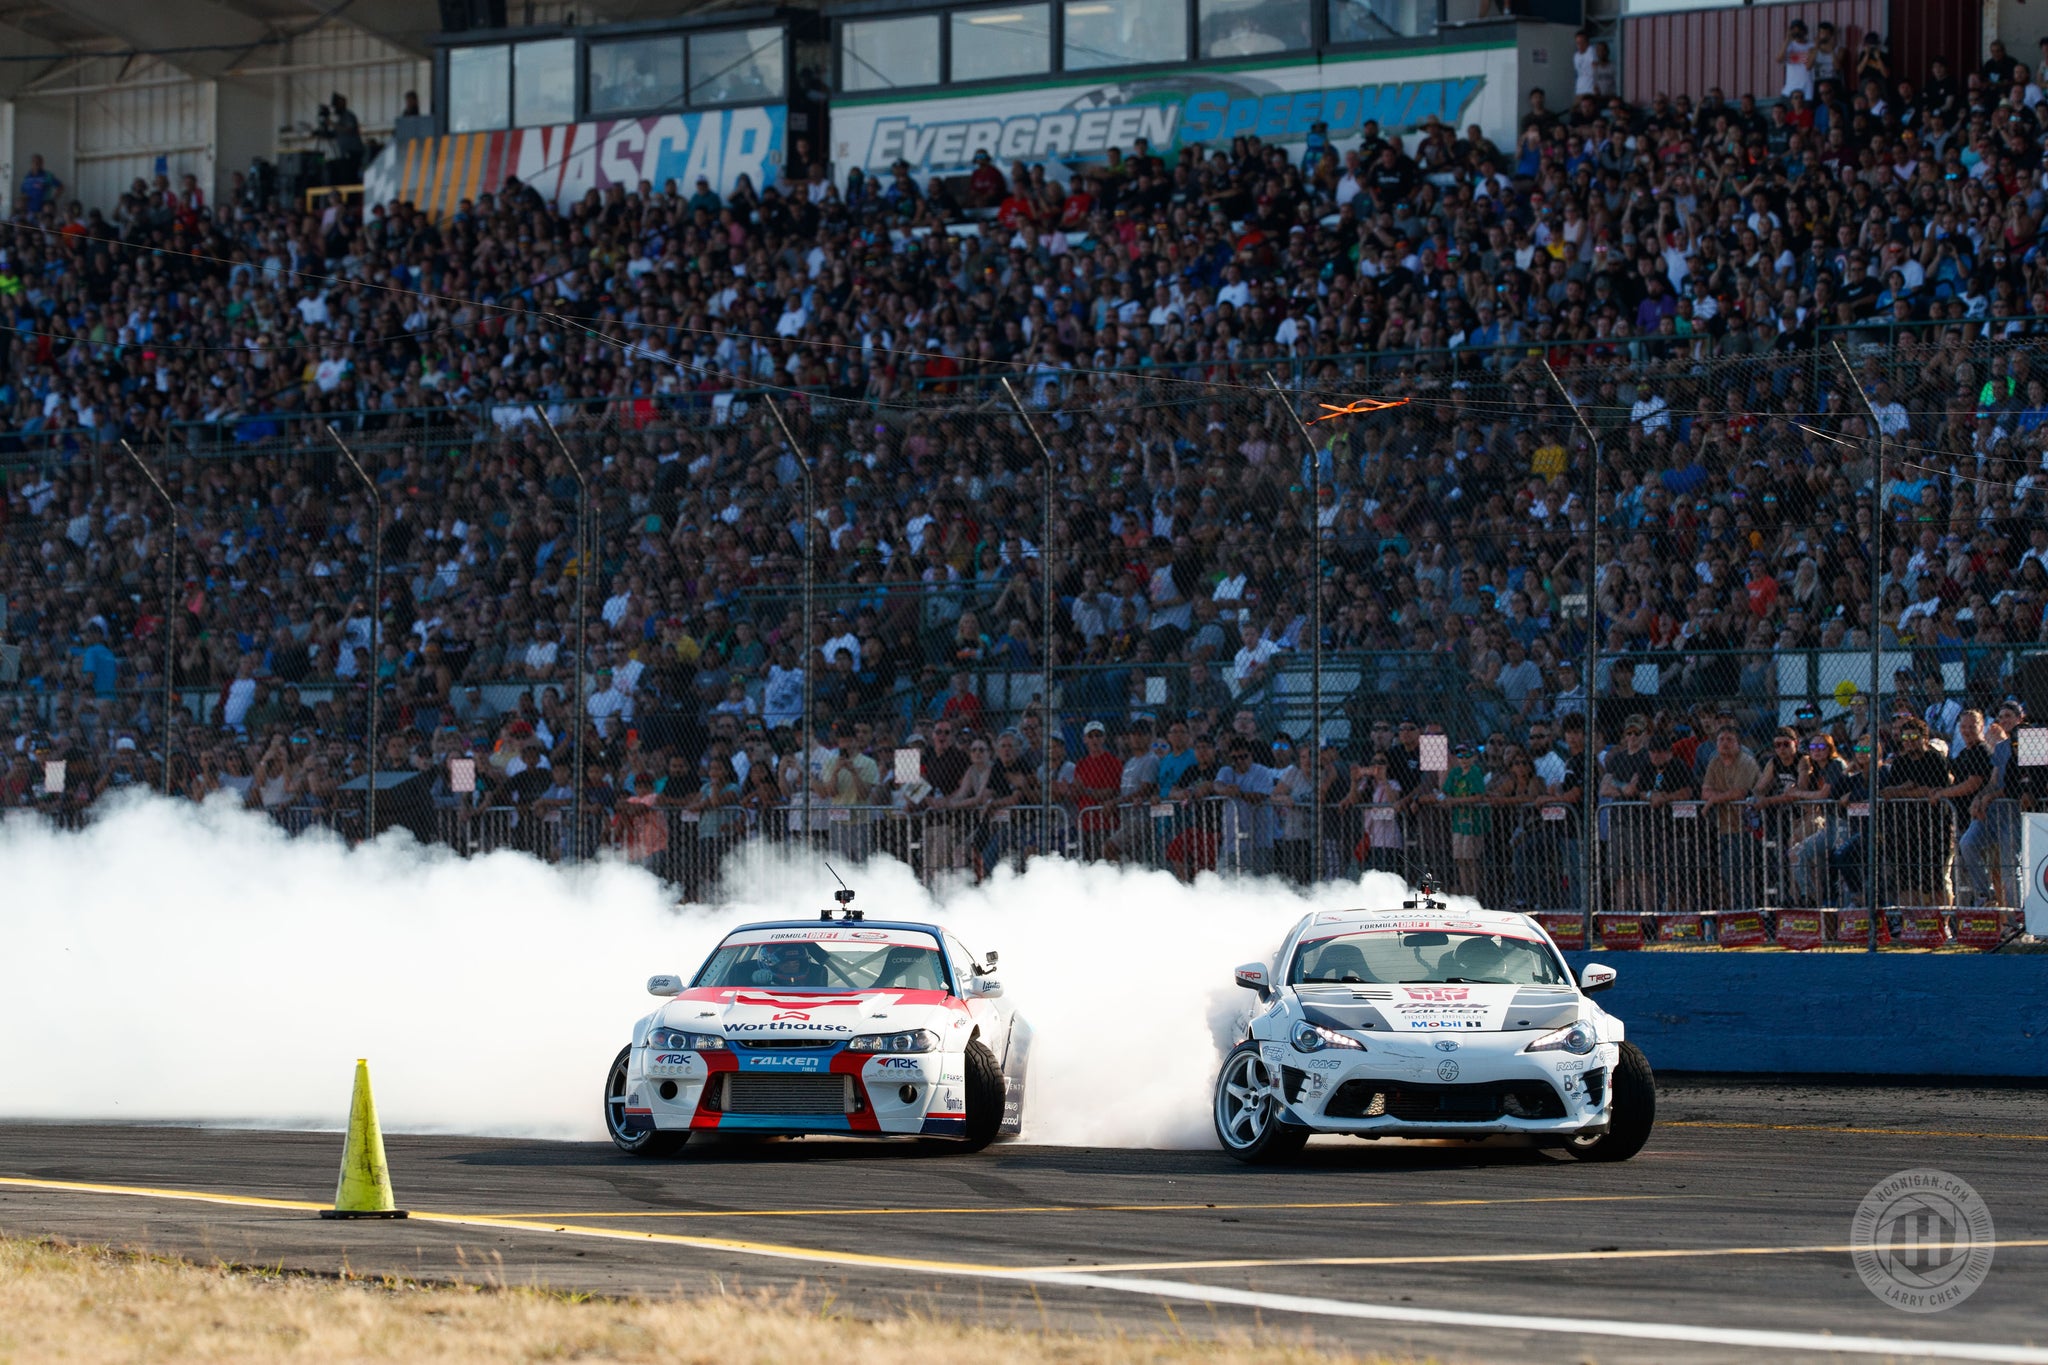 VH8 – The 2JZ is Rising in Formula Drift